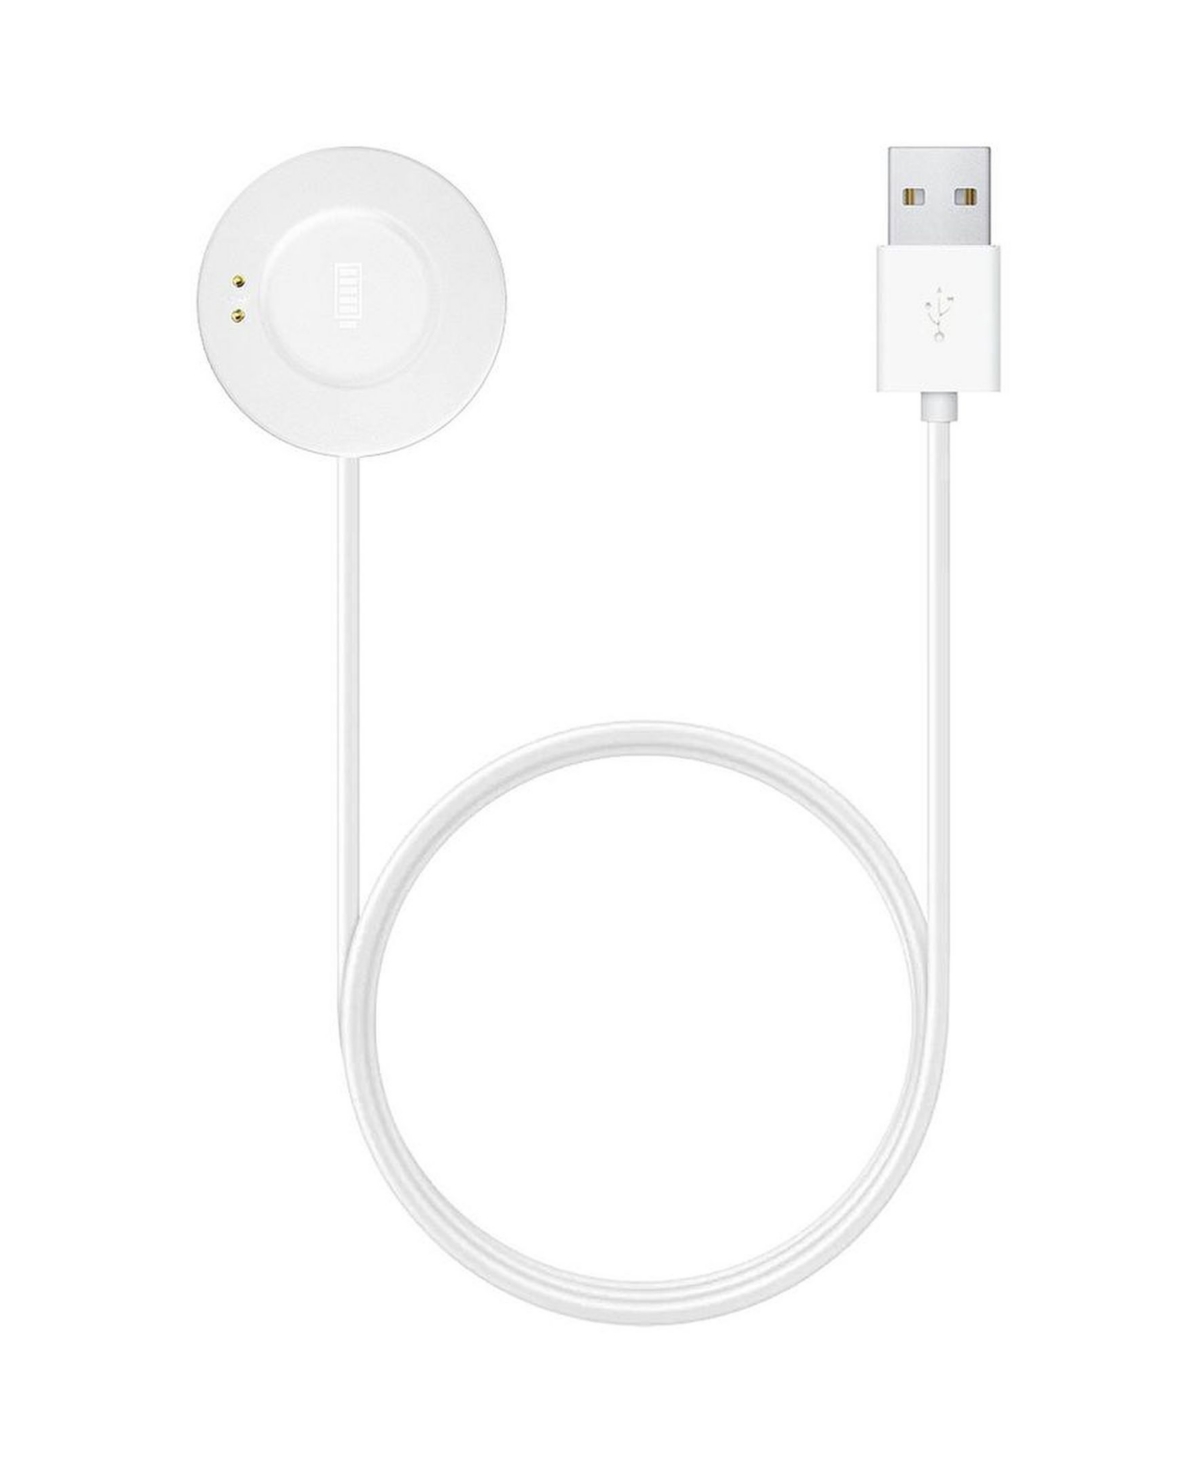 Smartwatch Replacement Usb Charger Cable - White